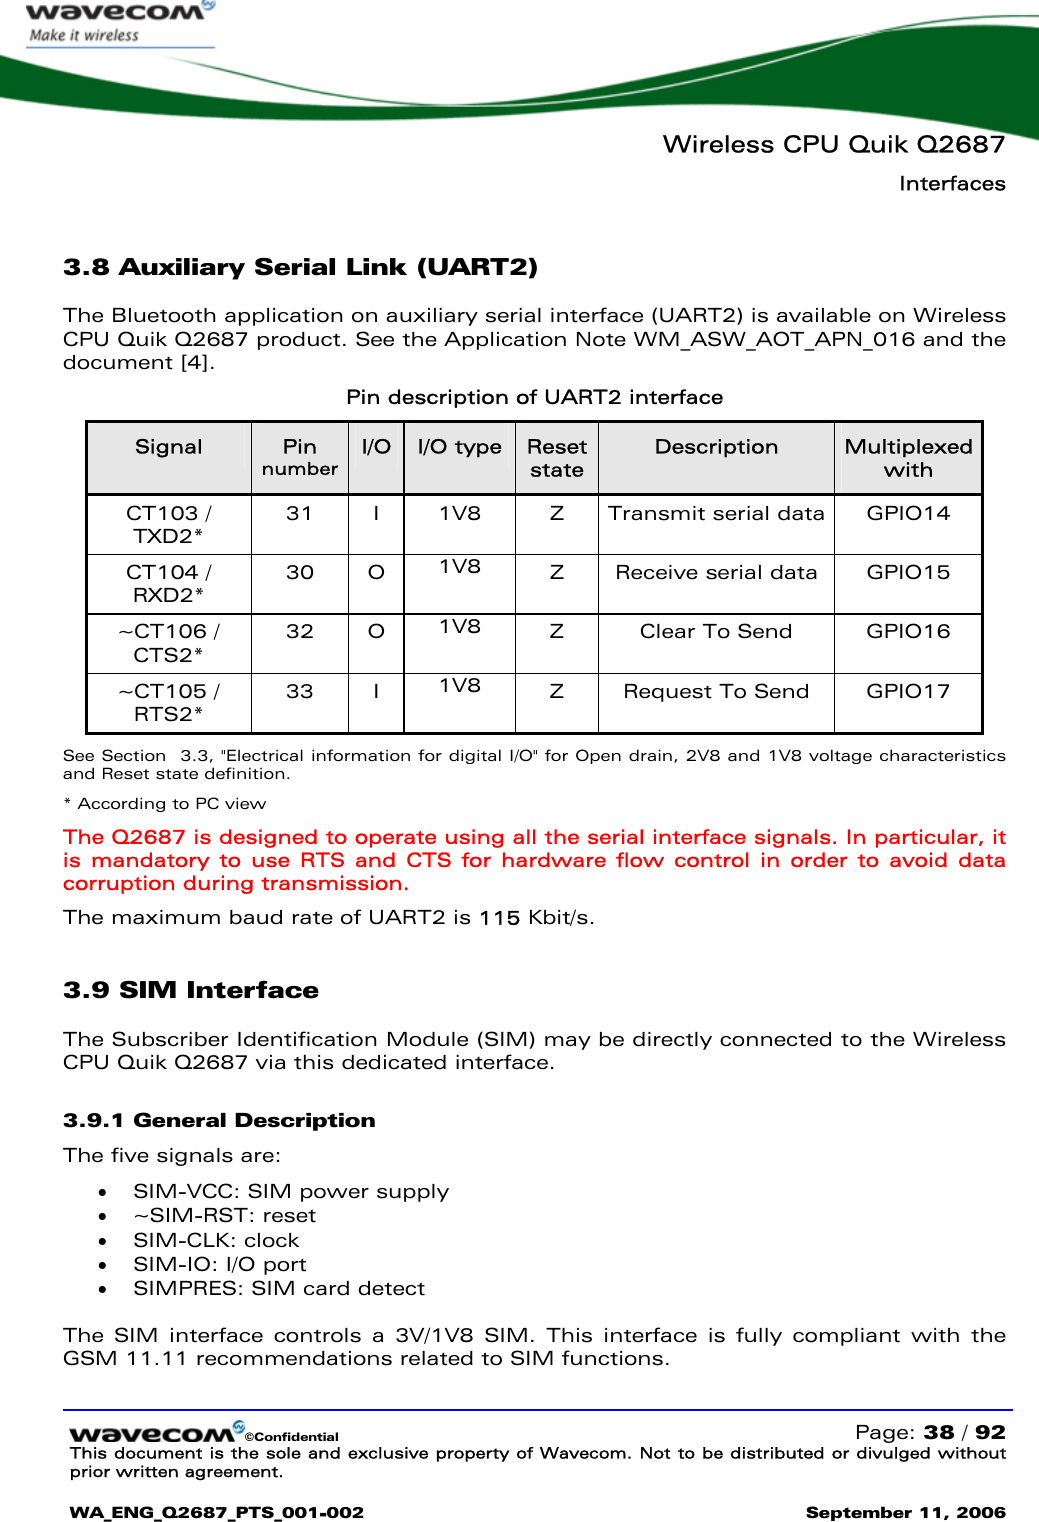   Wireless CPU Quik Q2687 Interfaces   ©Confidential   Page: 38 / 92 This document is the sole and exclusive property of Wavecom. Not to be distributed or divulged without prior written agreement.  WA_ENG_Q2687_PTS_001-002 September 11, 2006   3.8 Auxiliary Serial Link (UART2) The Bluetooth application on auxiliary serial interface (UART2) is available on Wireless CPU Quik Q2687 product. See the Application Note WM_ASW_AOT_APN_016 and the document [4]. Pin description of UART2 interface Signal  Pin number I/O  I/O type  Reset state Description  Multiplexed with CT103 / TXD2* 31 I 1V8  Z Transmit serial data GPIO14 CT104 / RXD2* 30 O 1V8  Z Receive serial data GPIO15 ~CT106 / CTS2* 32 O 1V8  Z Clear To Send GPIO16 ~CT105 / RTS2*  33 I 1V8  Z Request To Send GPIO17 See Section  3.3, &quot;Electrical information for digital I/O&quot; for Open drain, 2V8 and 1V8 voltage characteristics and Reset state definition. * According to PC view The Q2687 is designed to operate using all the serial interface signals. In particular, it is mandatory to use RTS and CTS for hardware flow control in order to avoid data corruption during transmission. The maximum baud rate of UART2 is 115 Kbit/s. 3.9 SIM Interface The Subscriber Identification Module (SIM) may be directly connected to the Wireless CPU Quik Q2687 via this dedicated interface. 3.9.1 General Description The five signals are: • SIM-VCC: SIM power supply • ~SIM-RST: reset • SIM-CLK: clock • SIM-IO: I/O port • SIMPRES: SIM card detect  The SIM interface controls a 3V/1V8 SIM. This interface is fully compliant with the GSM 11.11 recommendations related to SIM functions. 